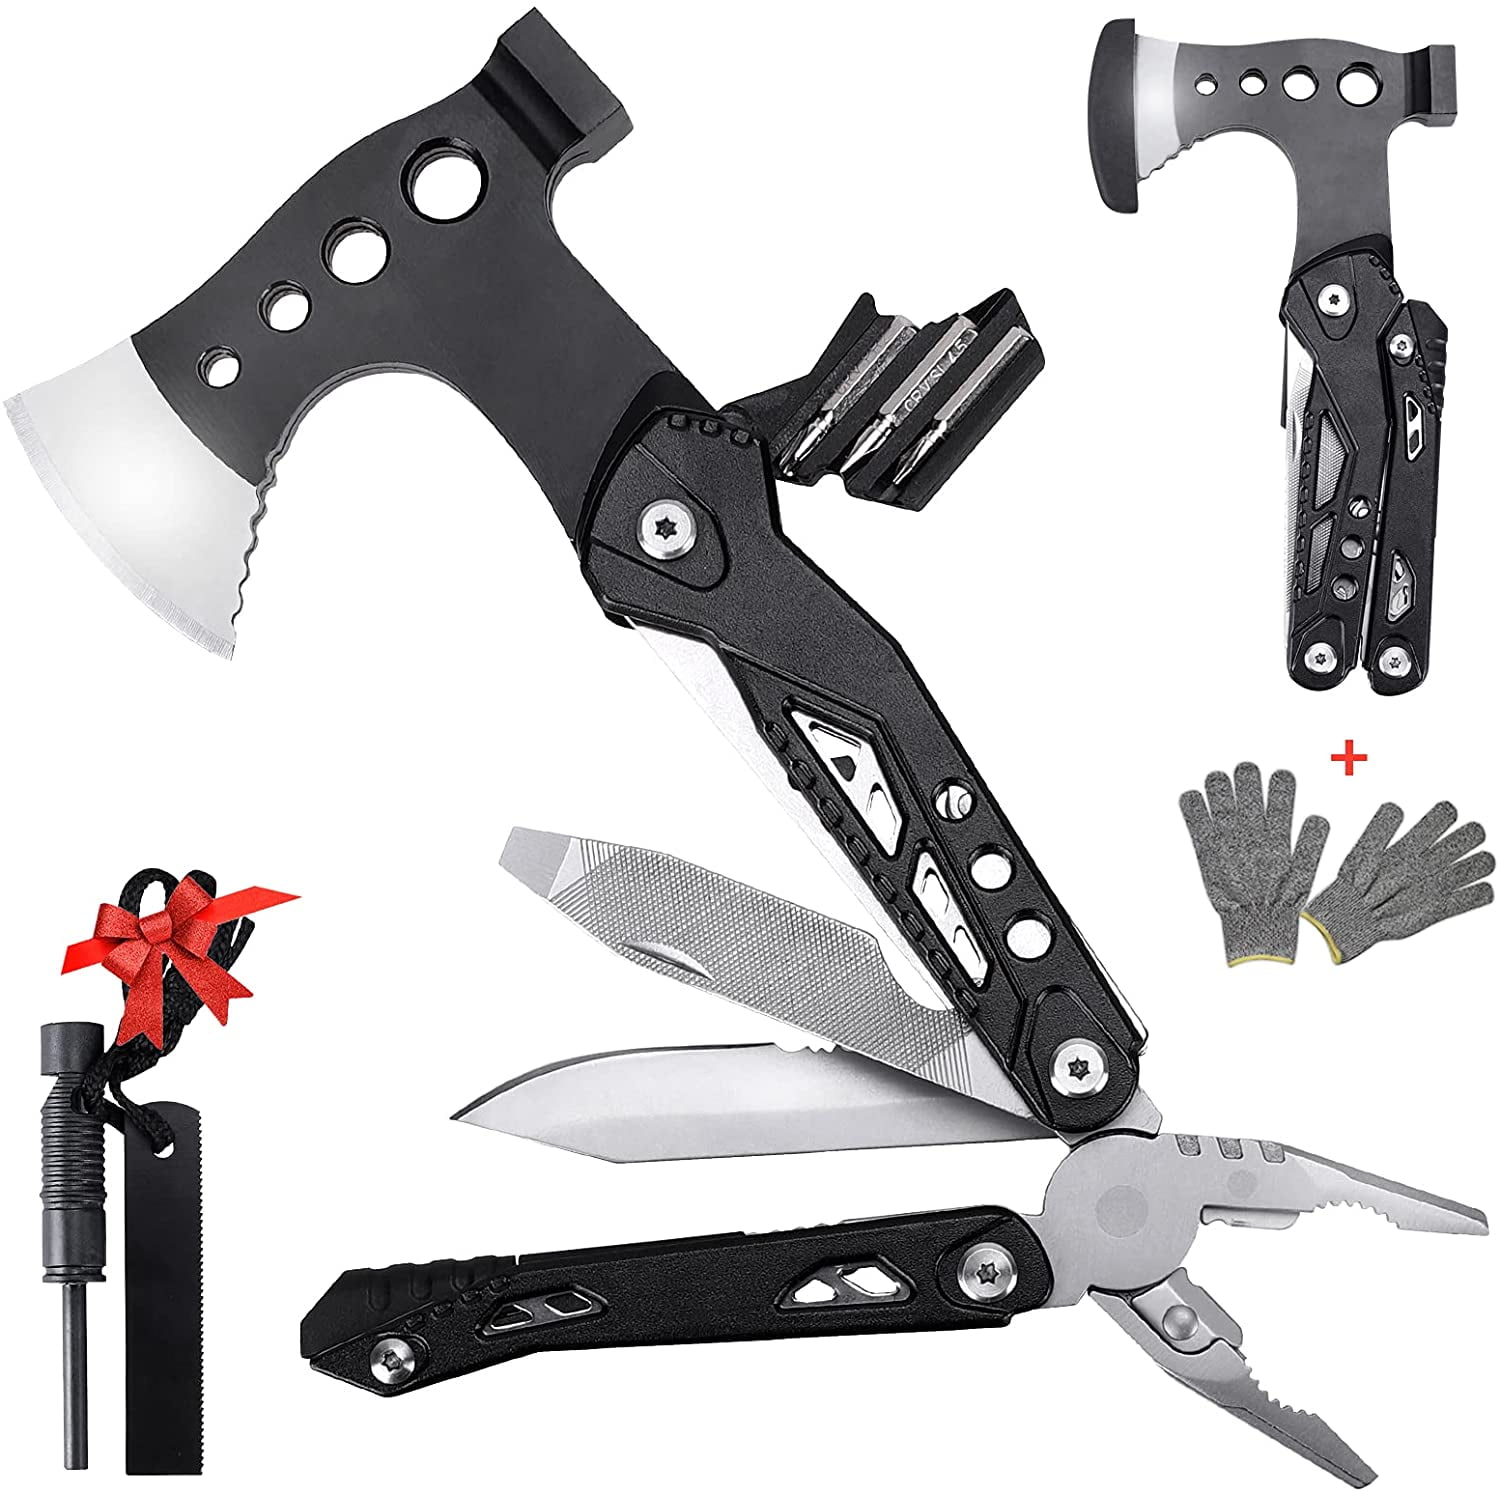 All In One Tools Mini Hammer Multitool - PVLVVW194 - IdeaStage Promotional  Products